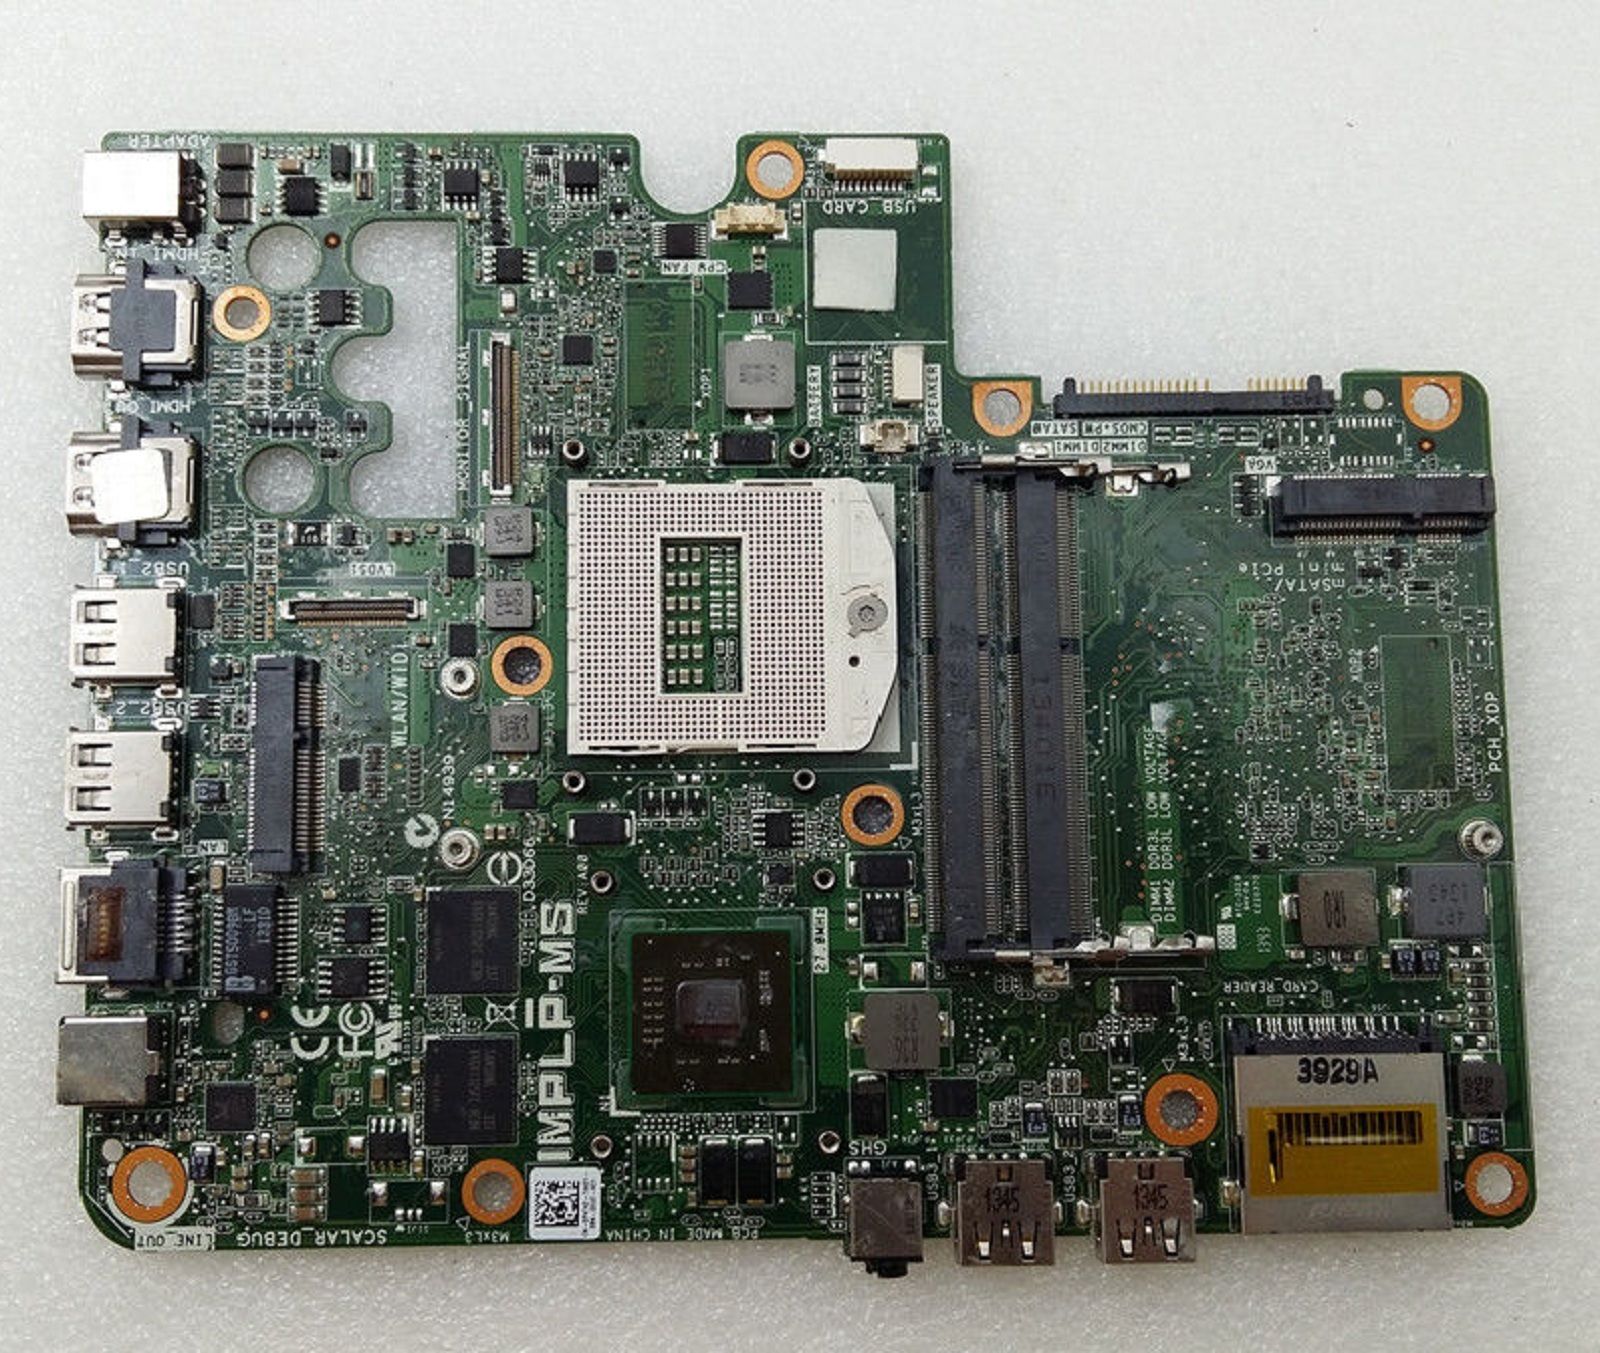 DELL Inspiron 2350 Intel Motherboard CN-0P4T42 0P4T42 P4T42 Test